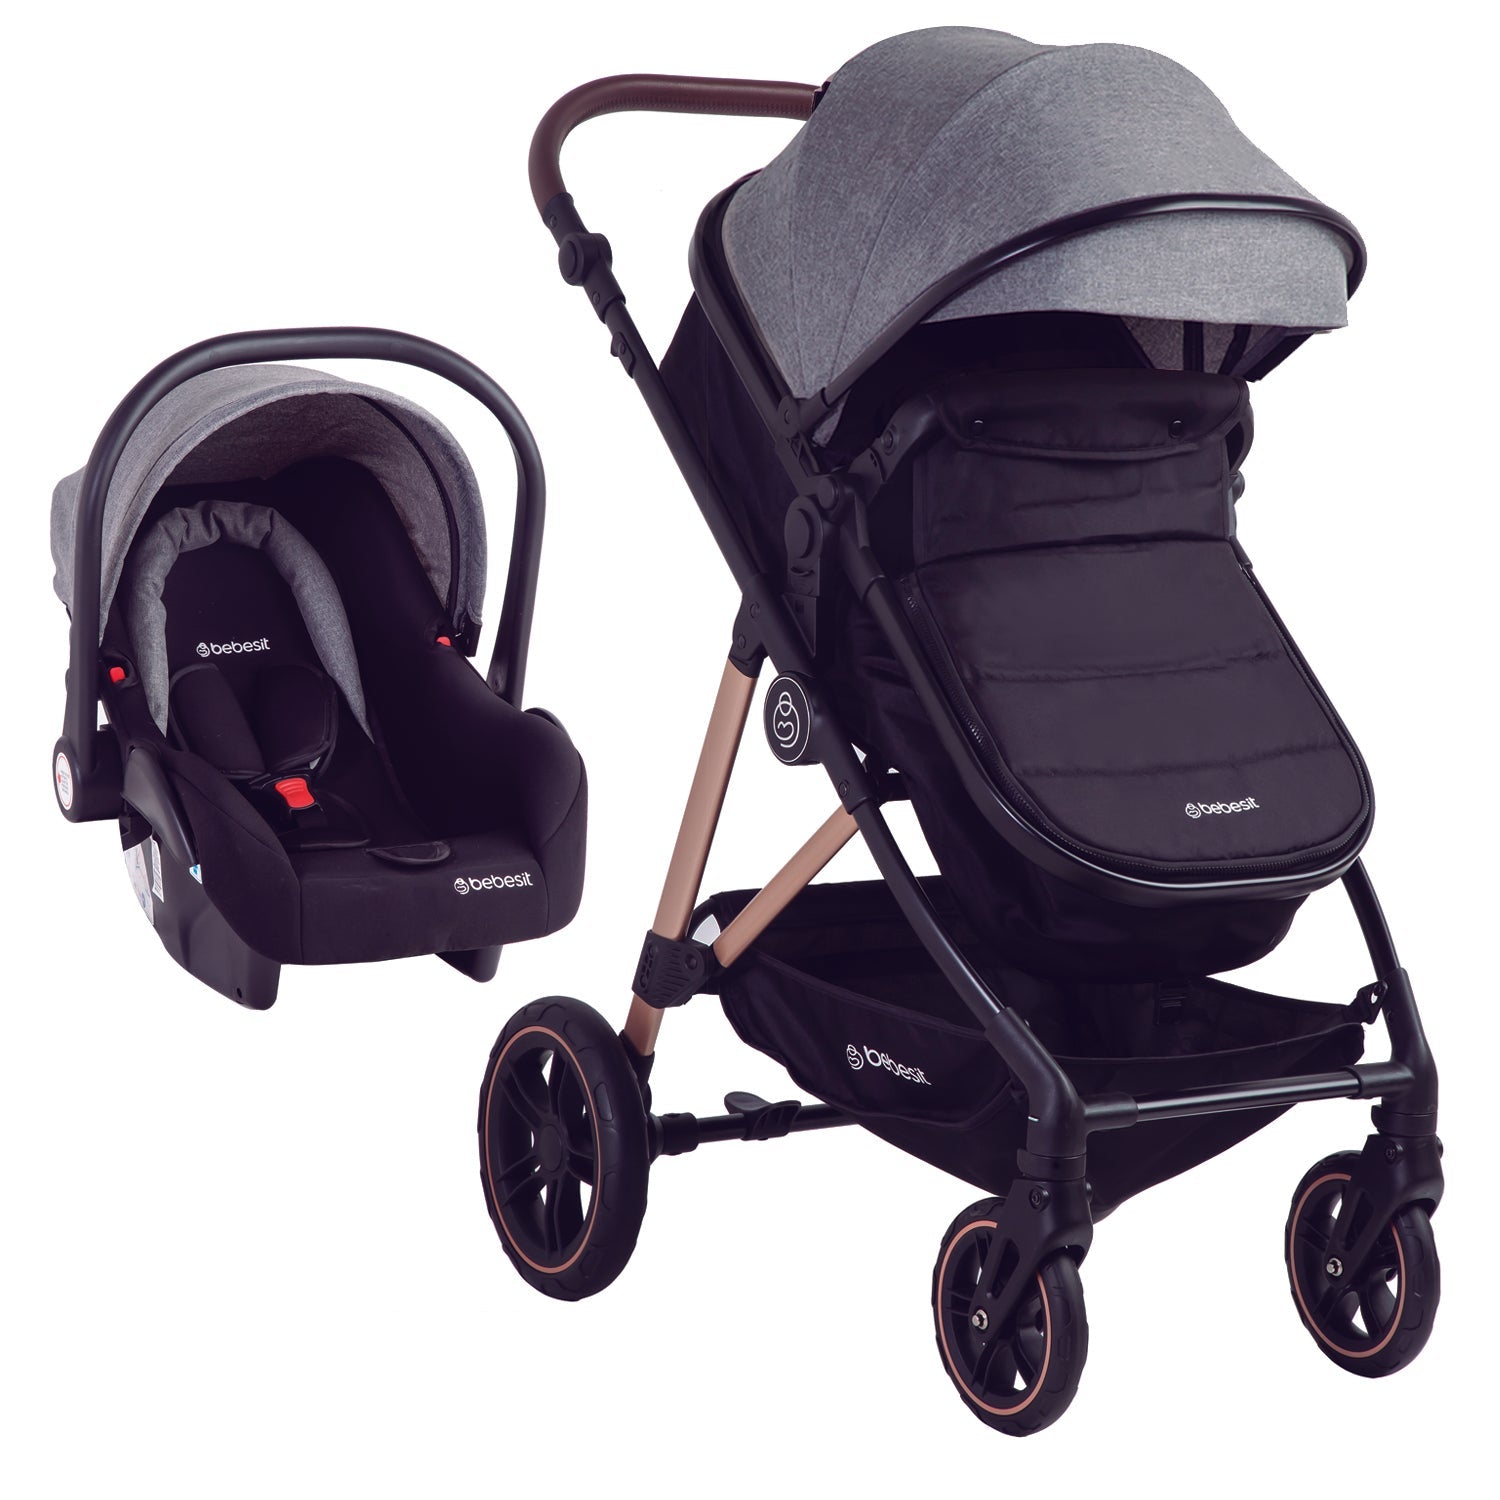 Coche Cuna travel system Neo Gris